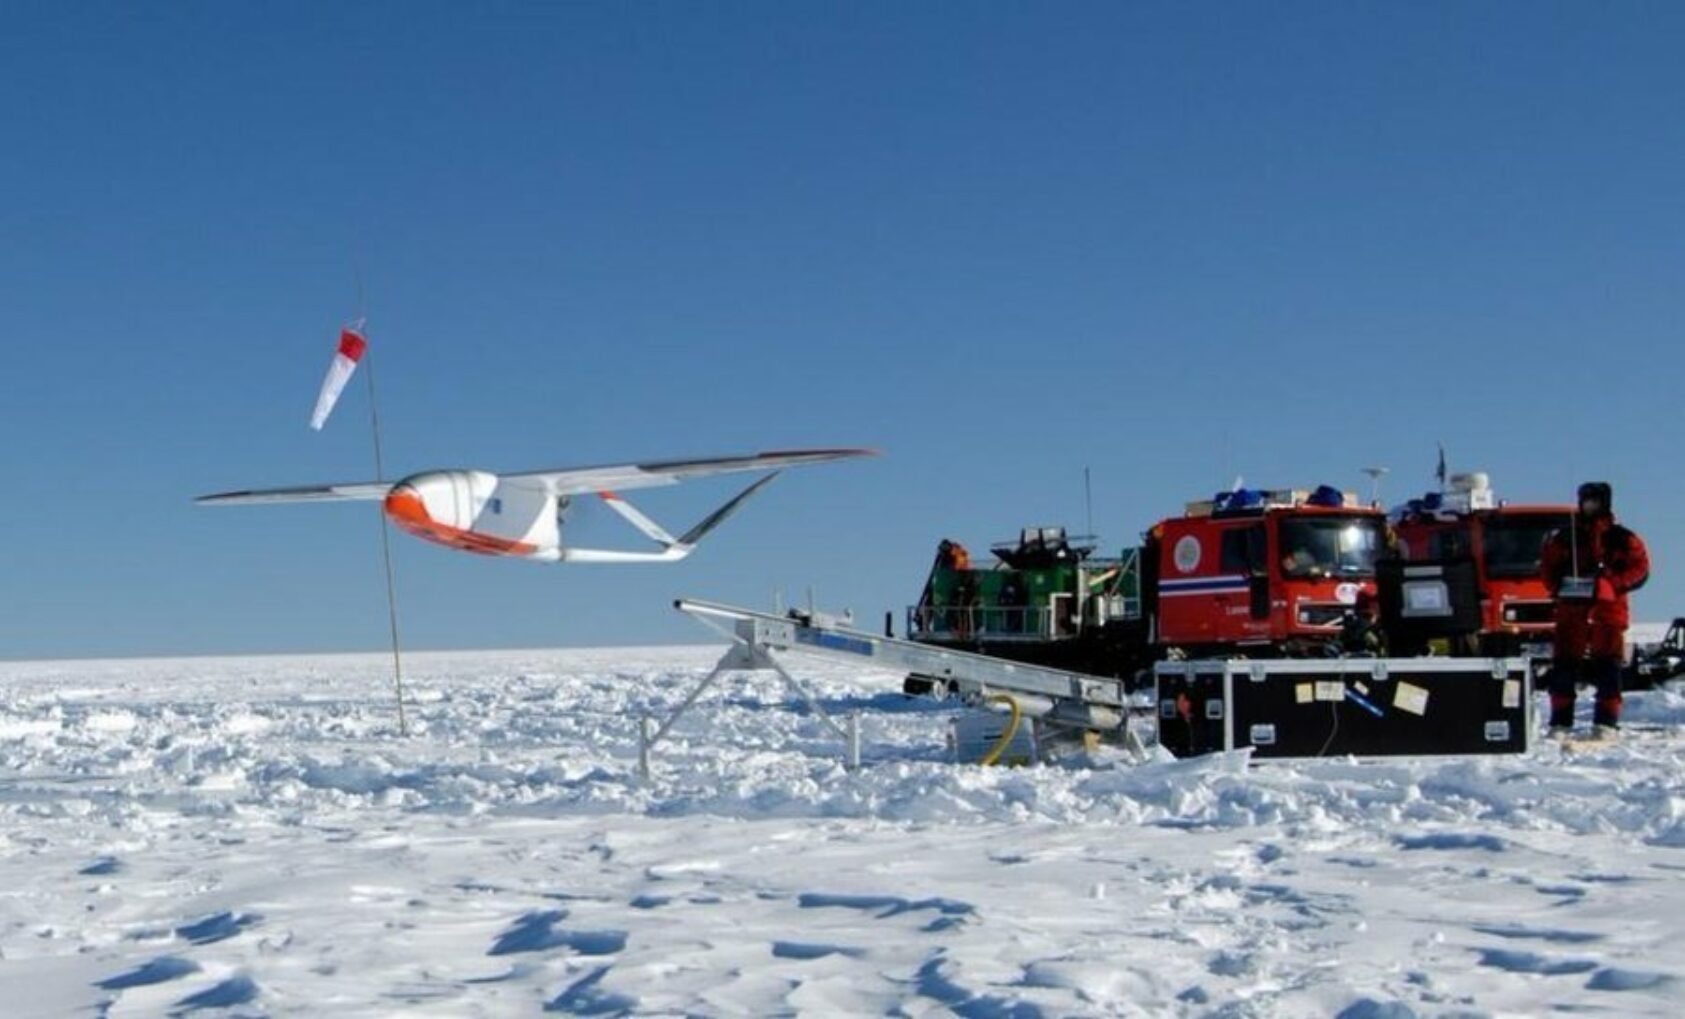 Jan-Gunnar Winther., In 2007, NORCE participated in a Norwegian-American expedition from the Troll station, through the interior of Antarctica in the direction of the South Pole., Roamer drone developed by NORCE photo Jan Gunnar Winther Norsk Polarinstitutt, , 